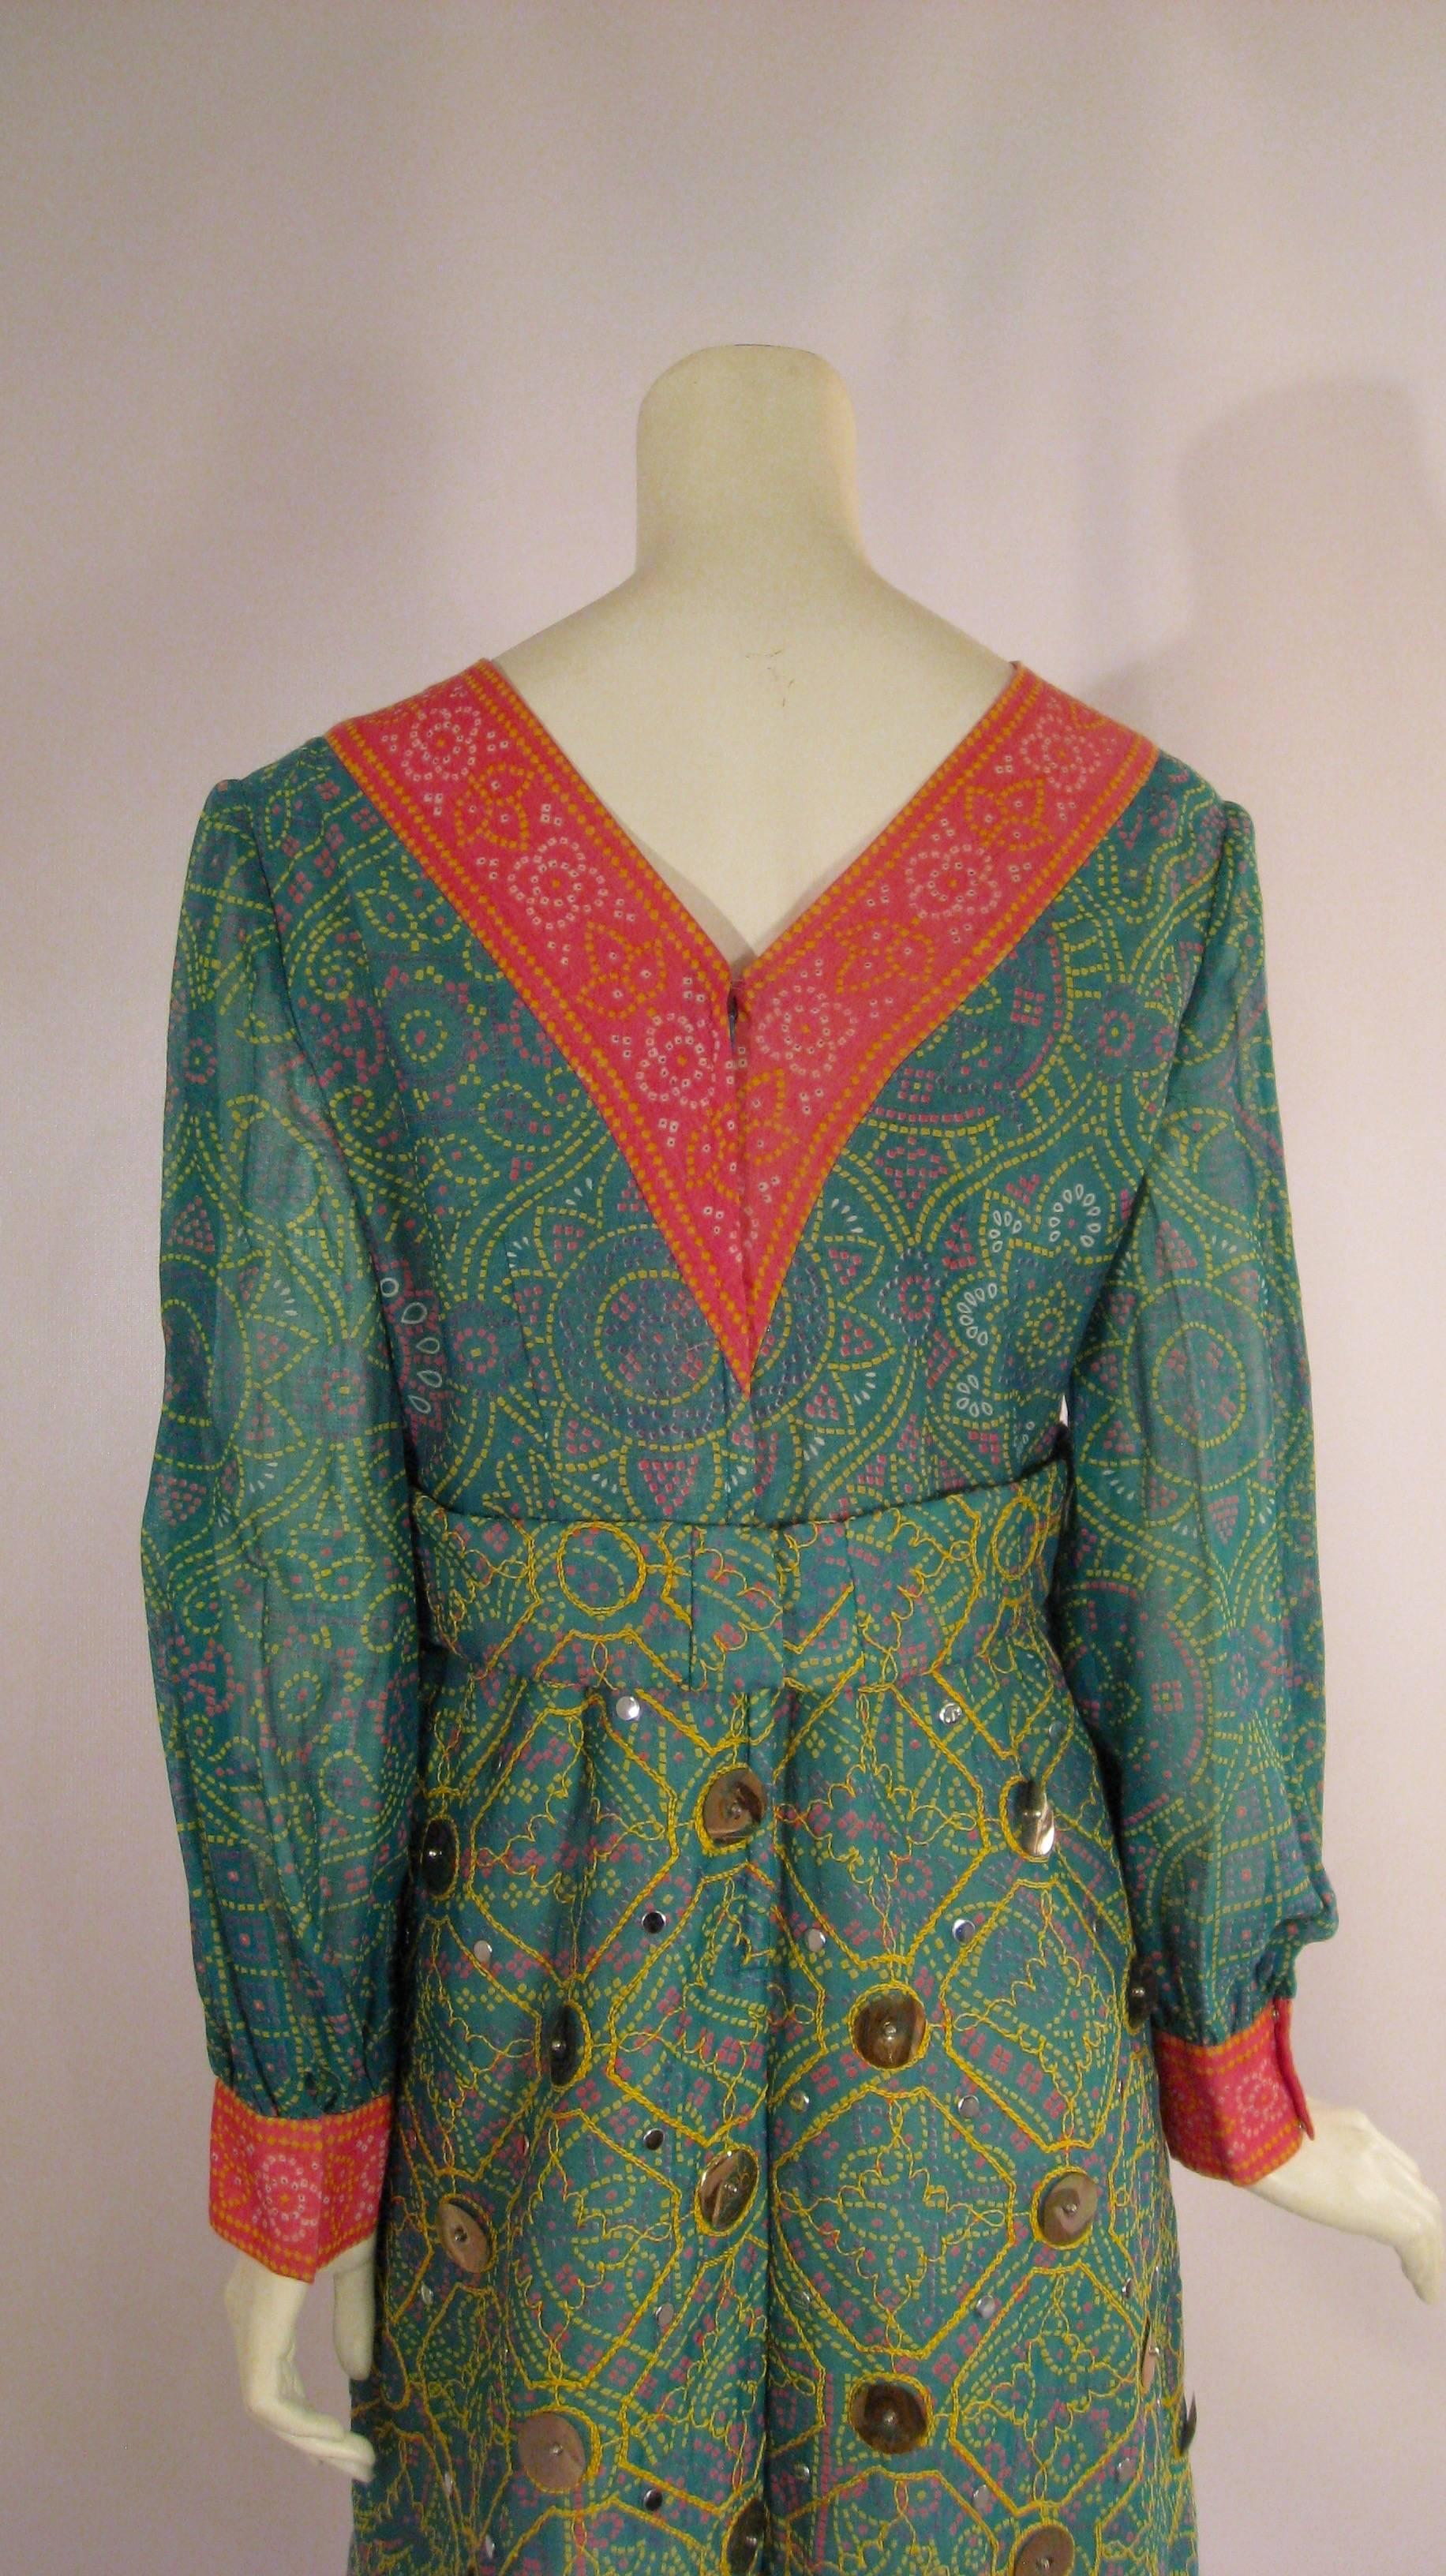 Oscar de la Renta Attributed 1970s Ethnic Print Dress with Embroidery Paillettes 4